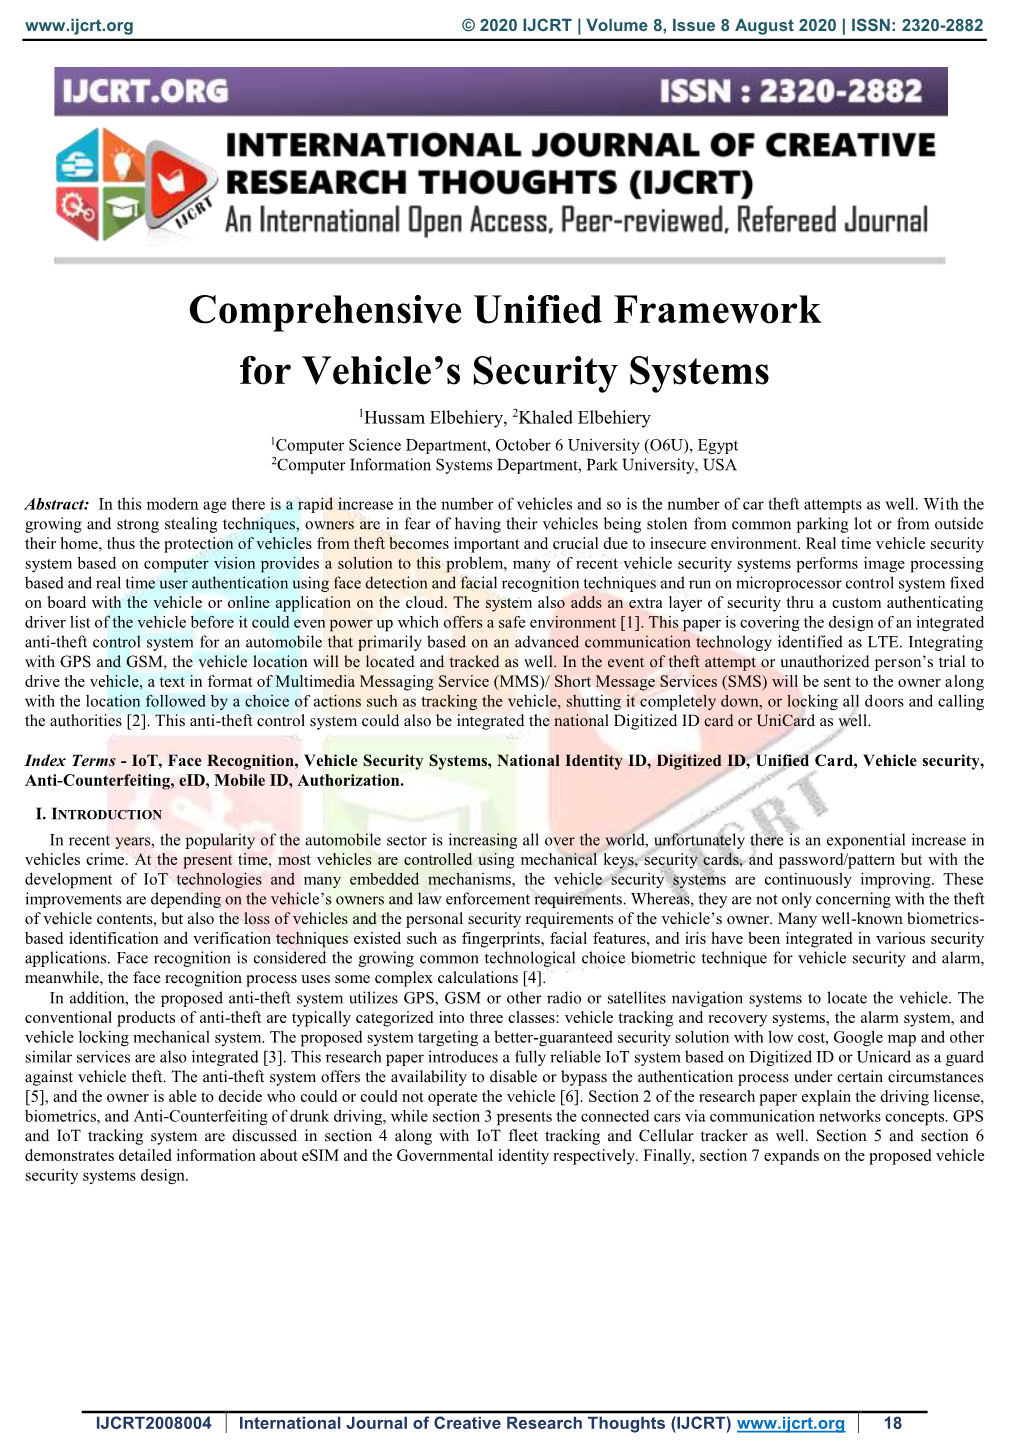 Comprehensive Unified Framework for Vehicle's Security Systems